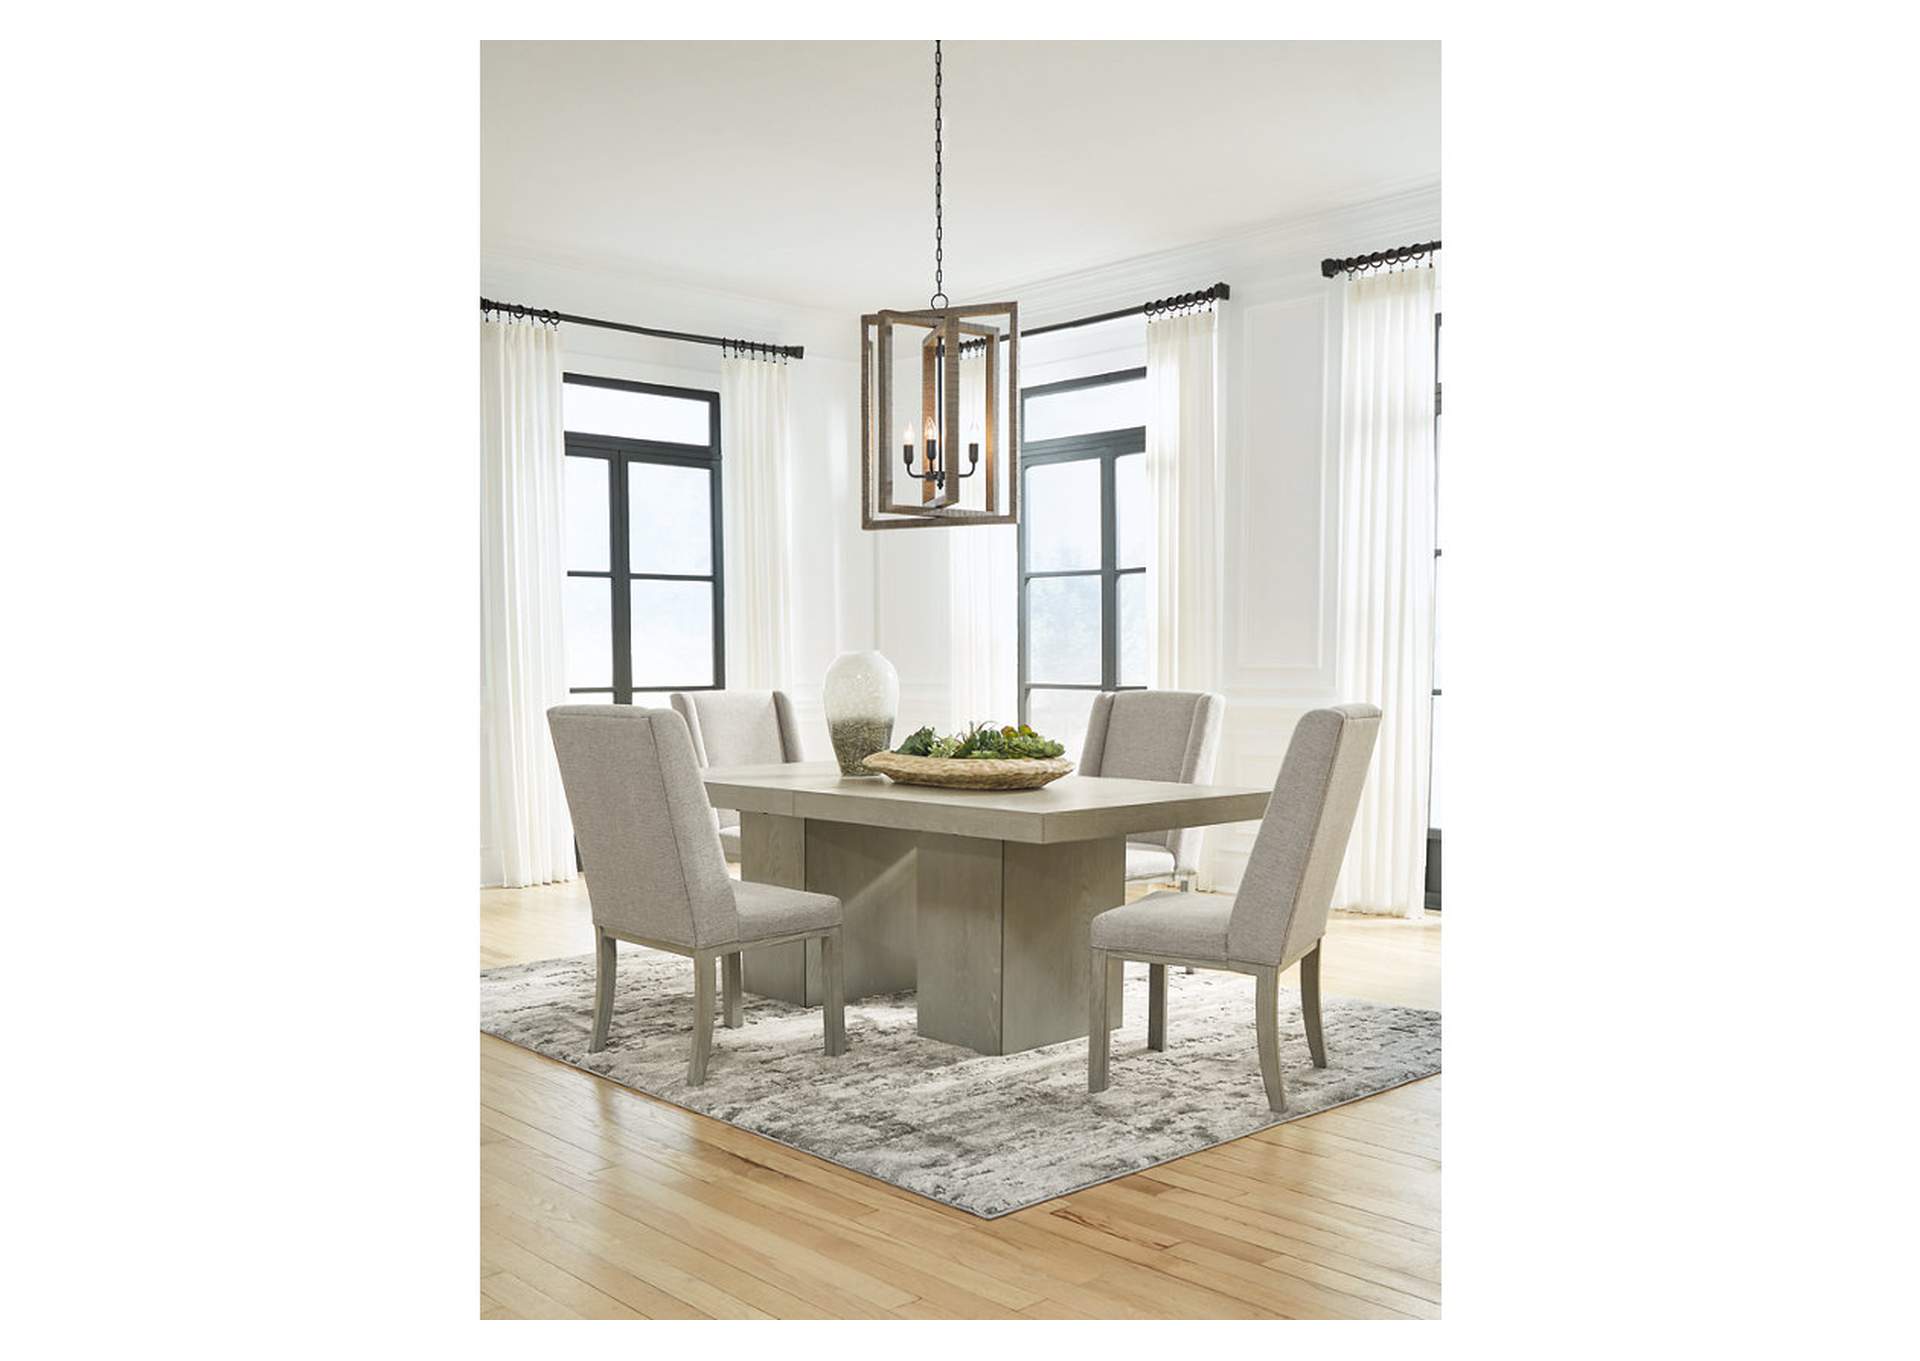 Fawnburg Dining Table and 4 Chairs with Storage,Millennium